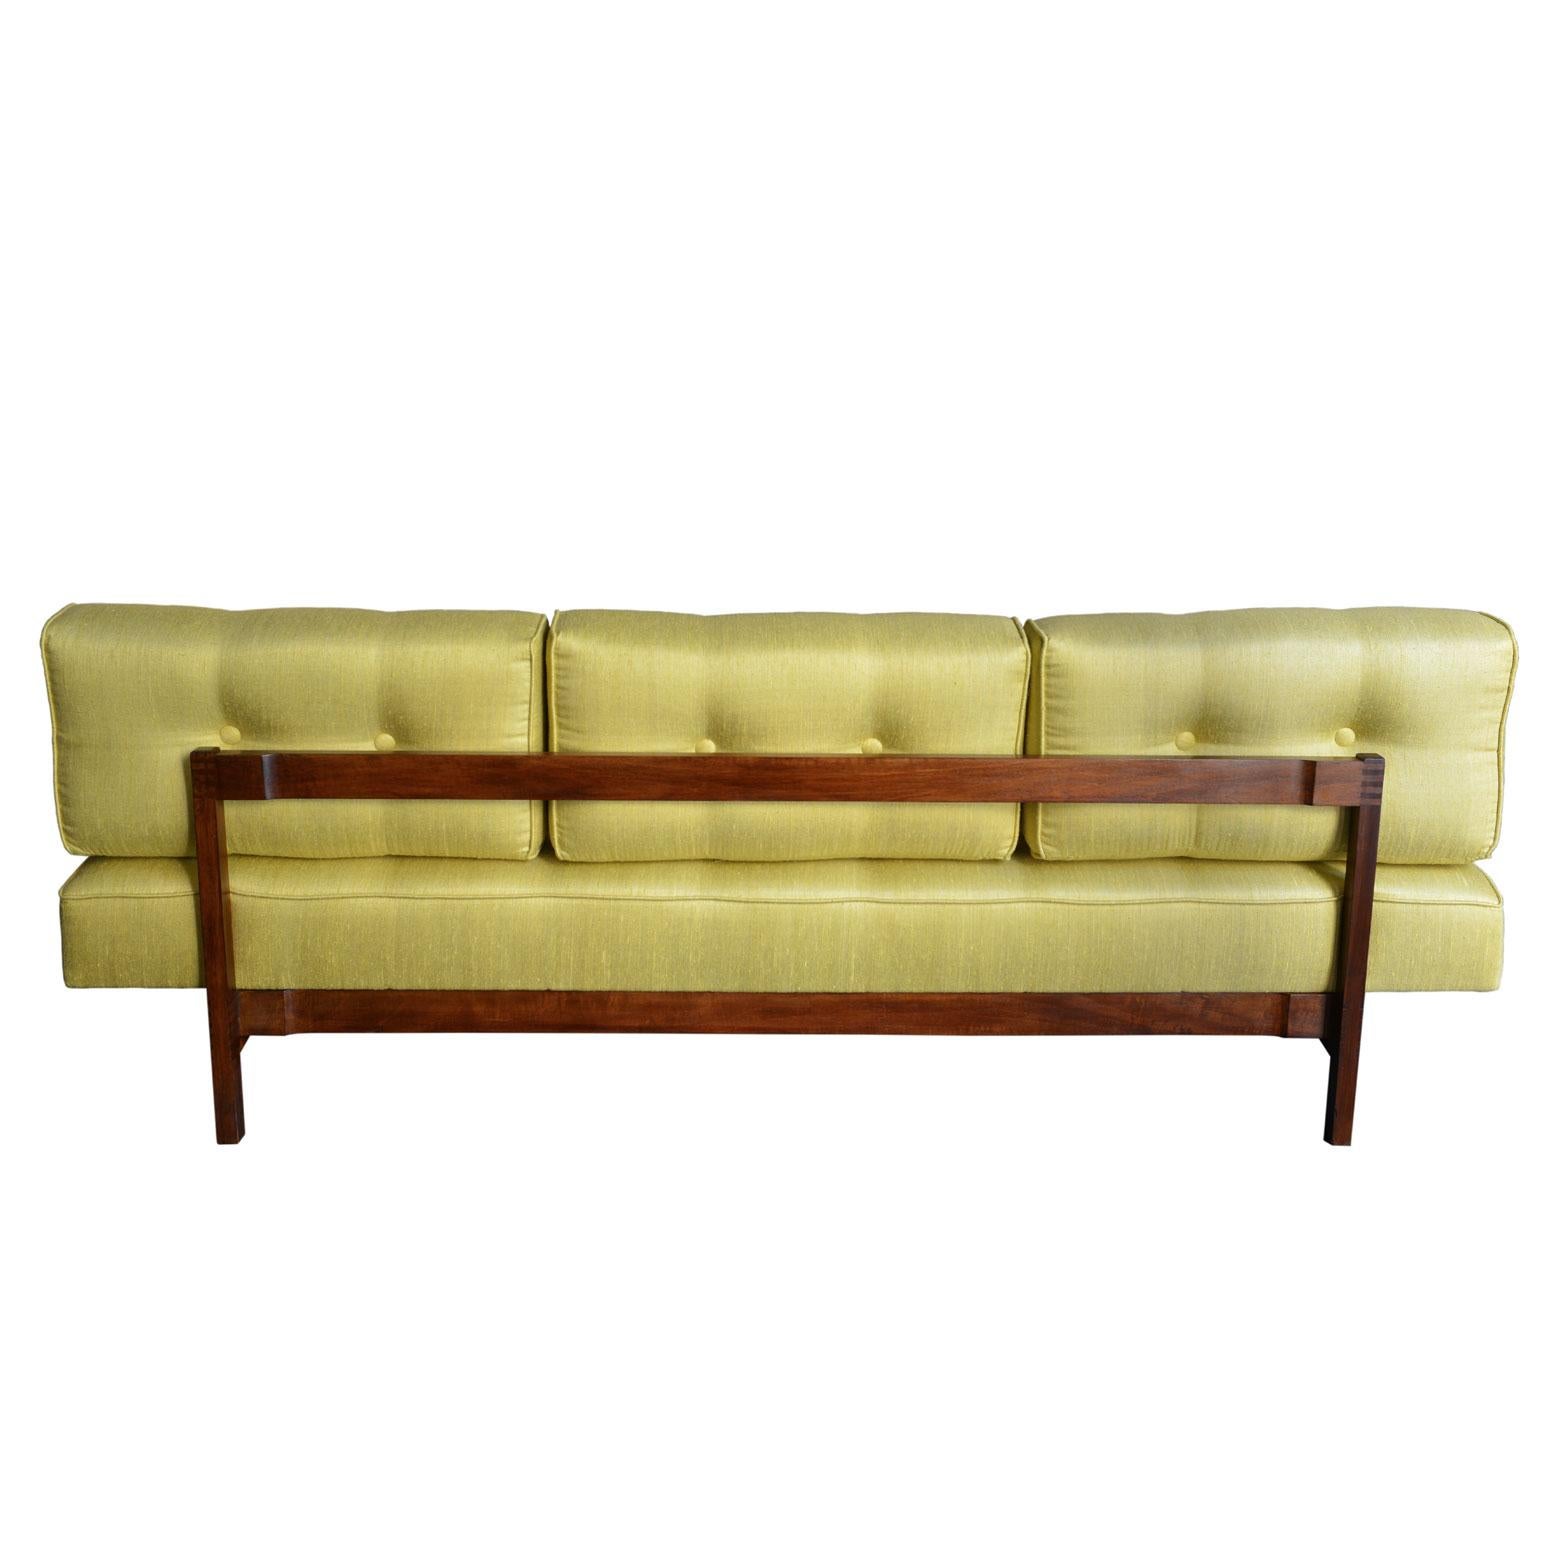 Sofa or daybed in walnut by Gianfranco Frattini. The original wooden structure has been newly reupholstered with a yellow silk shantung.